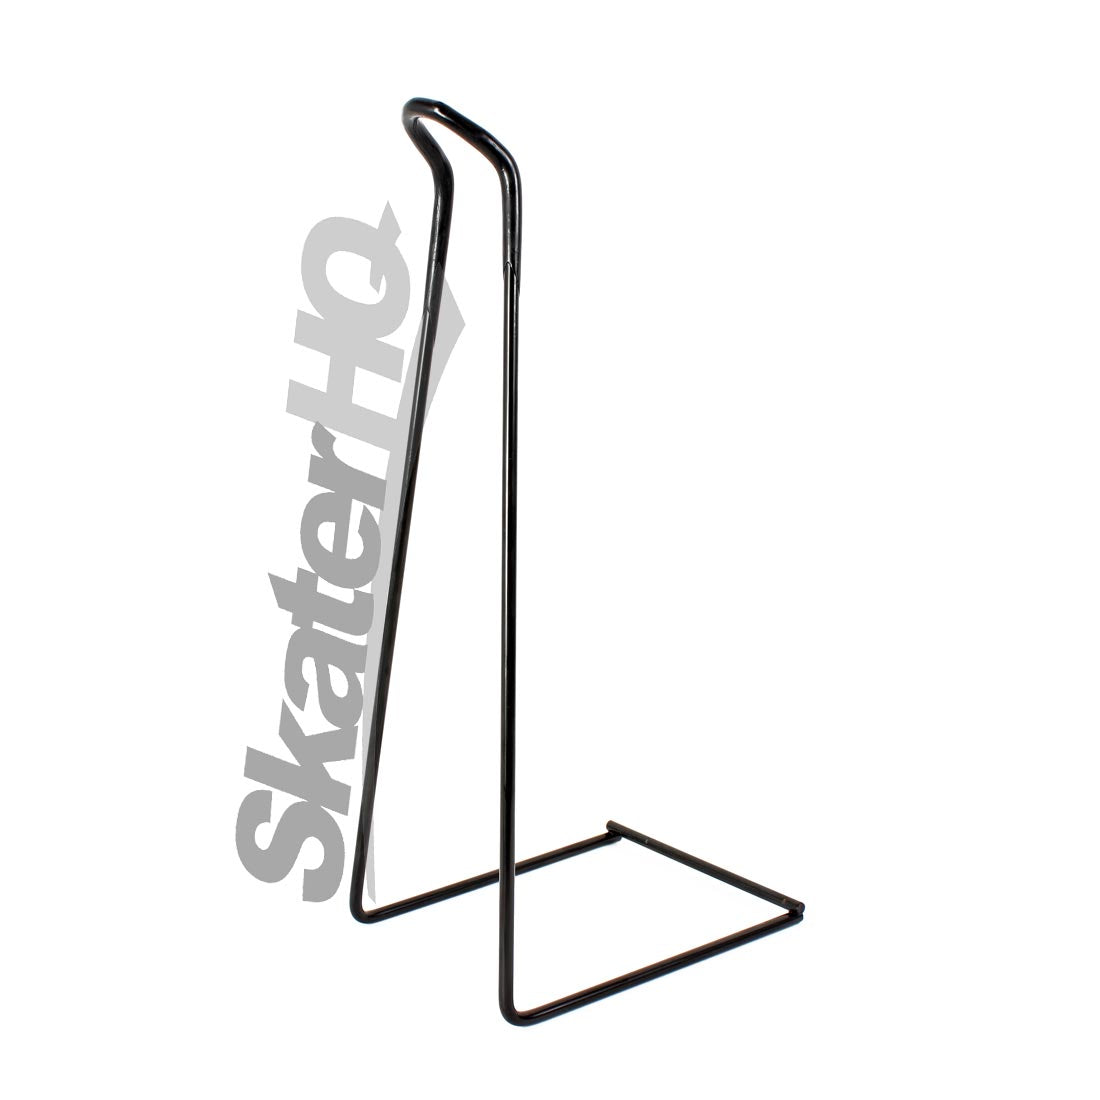 Unicycle Stand - Black